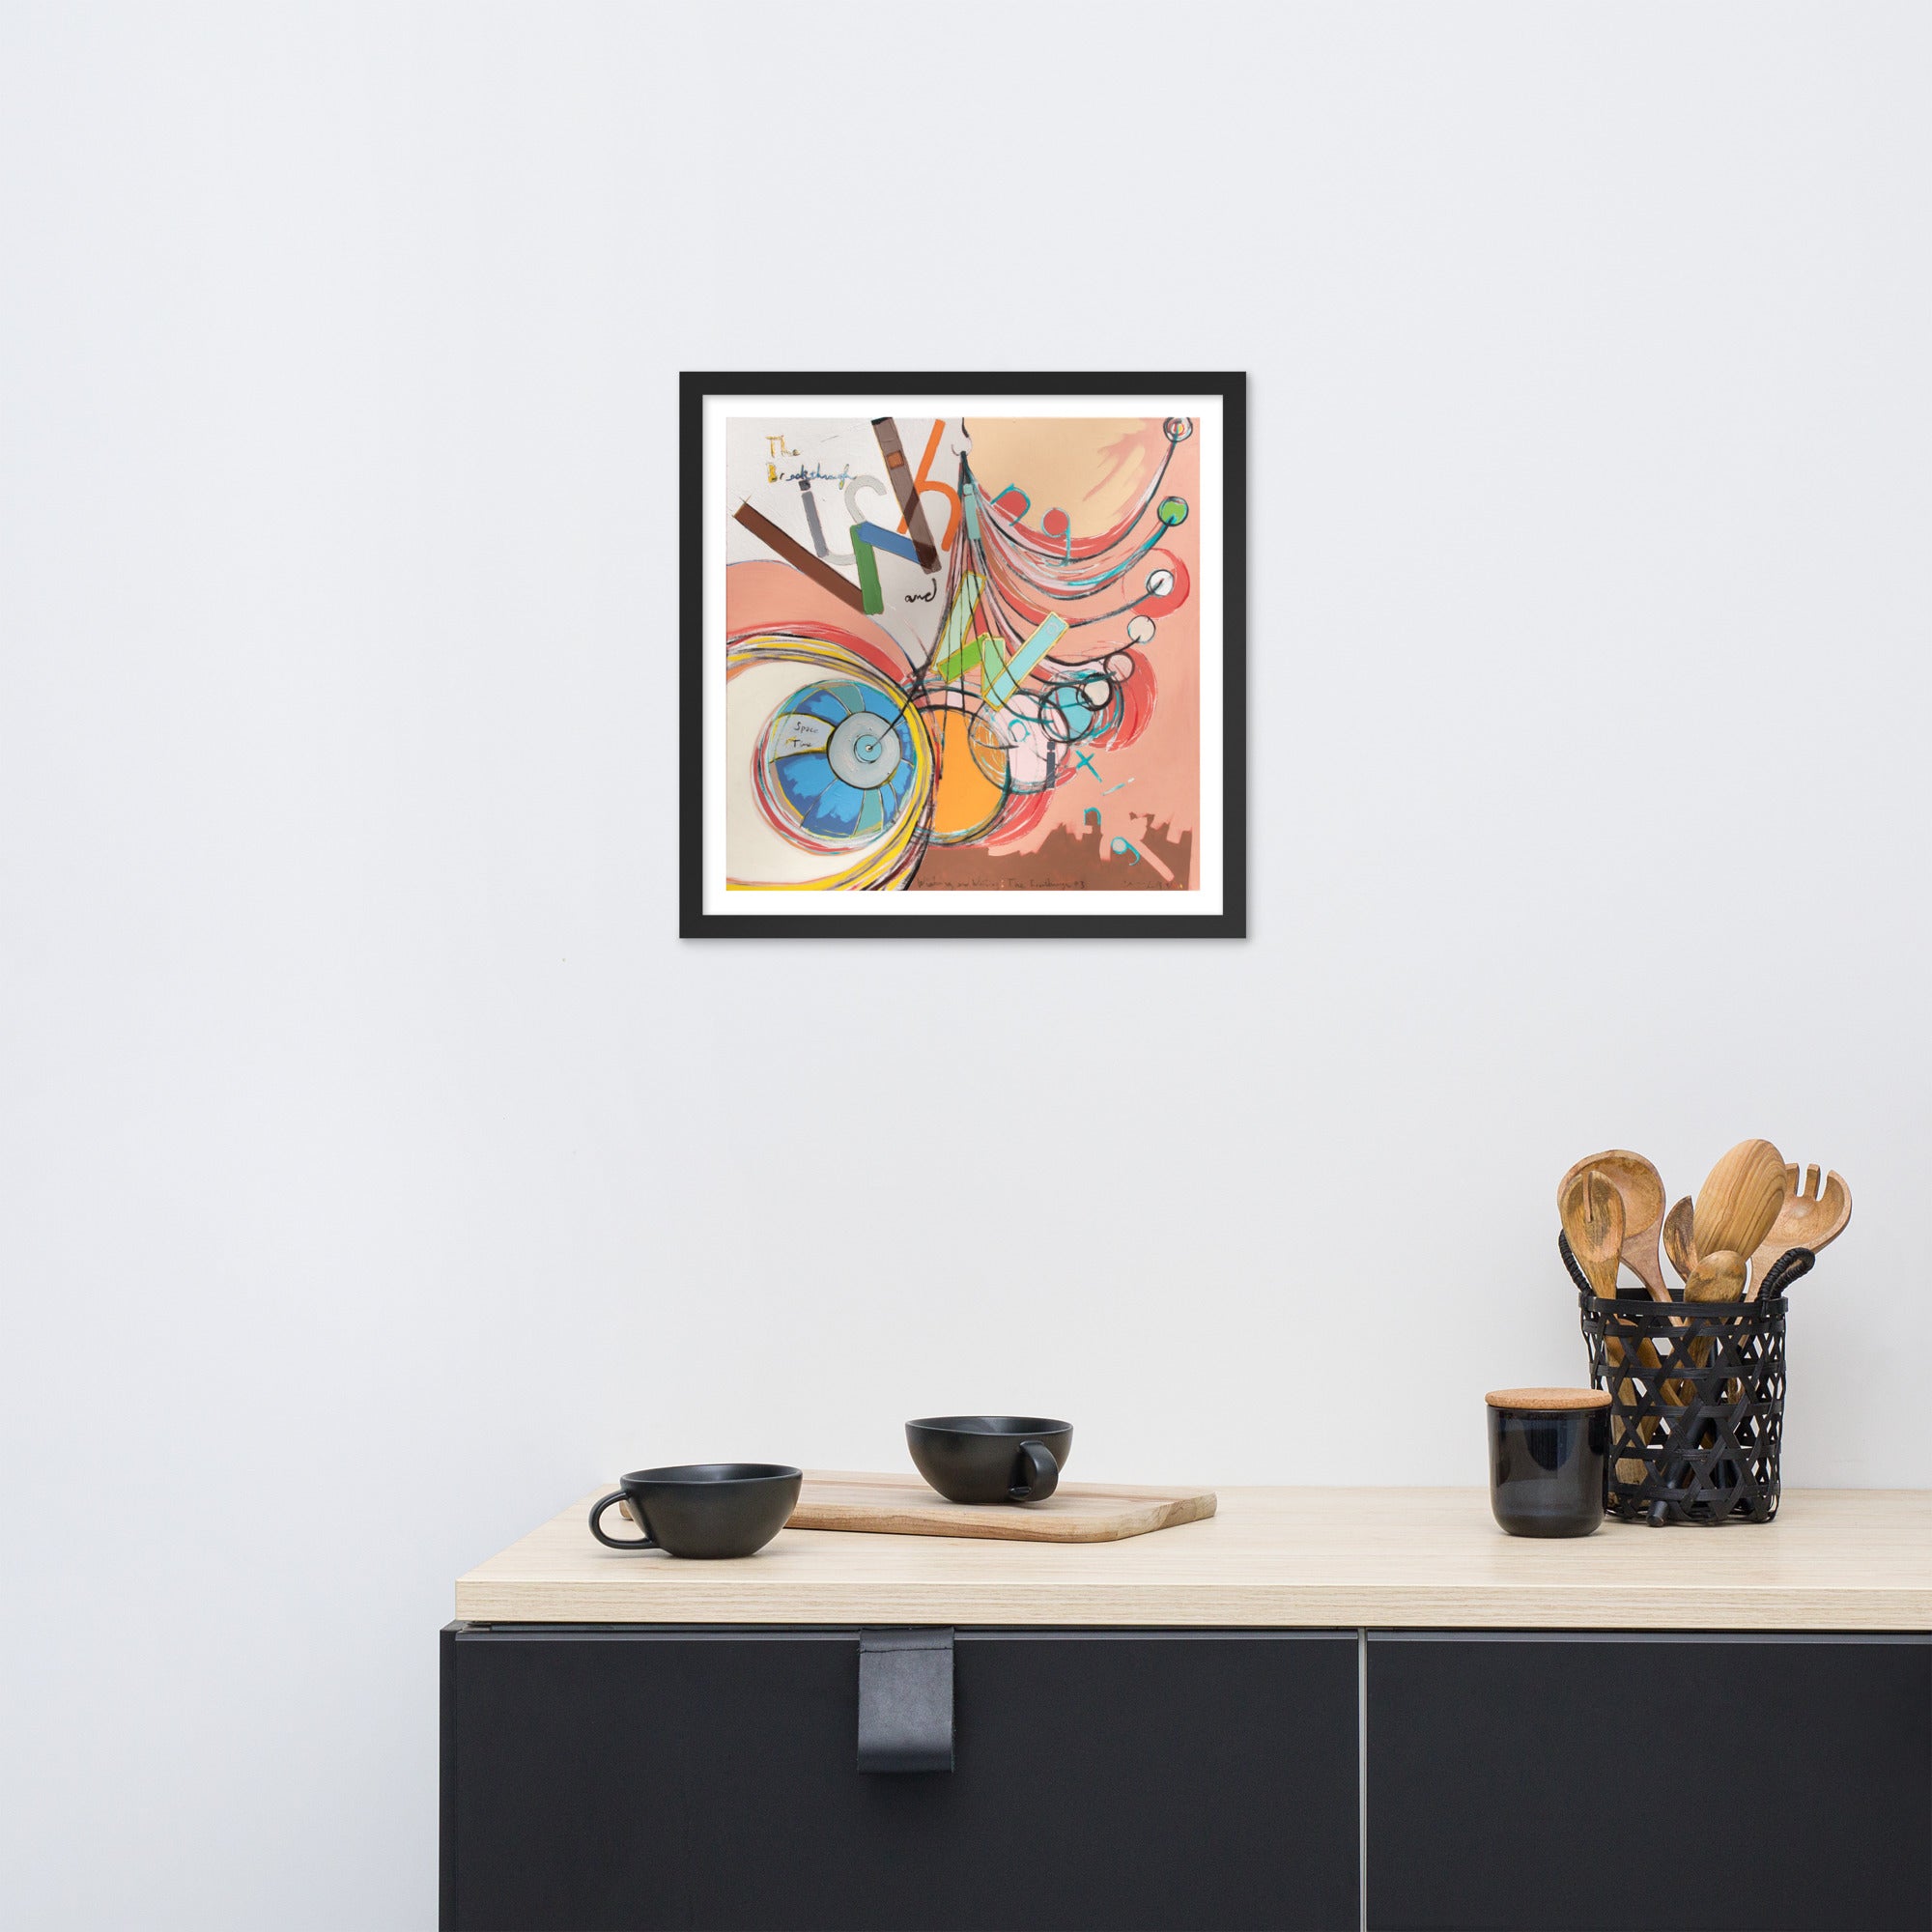 Wishing And Waiting - The Breakthrough #3 [Framed Print]